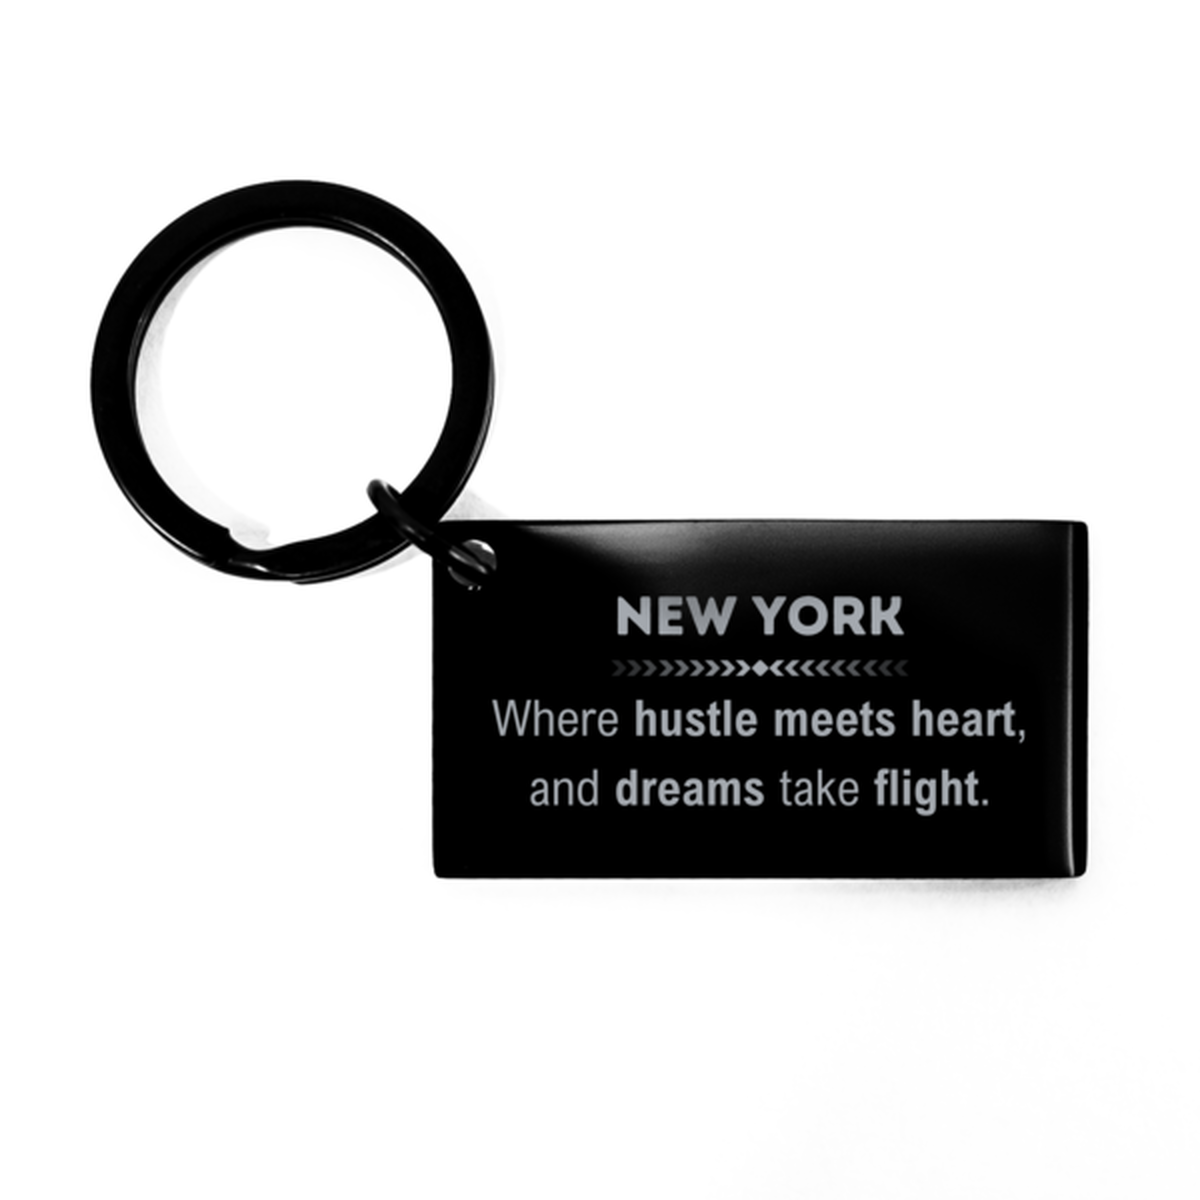 New York: Where hustle meets heart, and dreams take flight, New York Gifts, Proud New York Christmas Birthday New York Keychain, New York State People, Men, Women, Friends